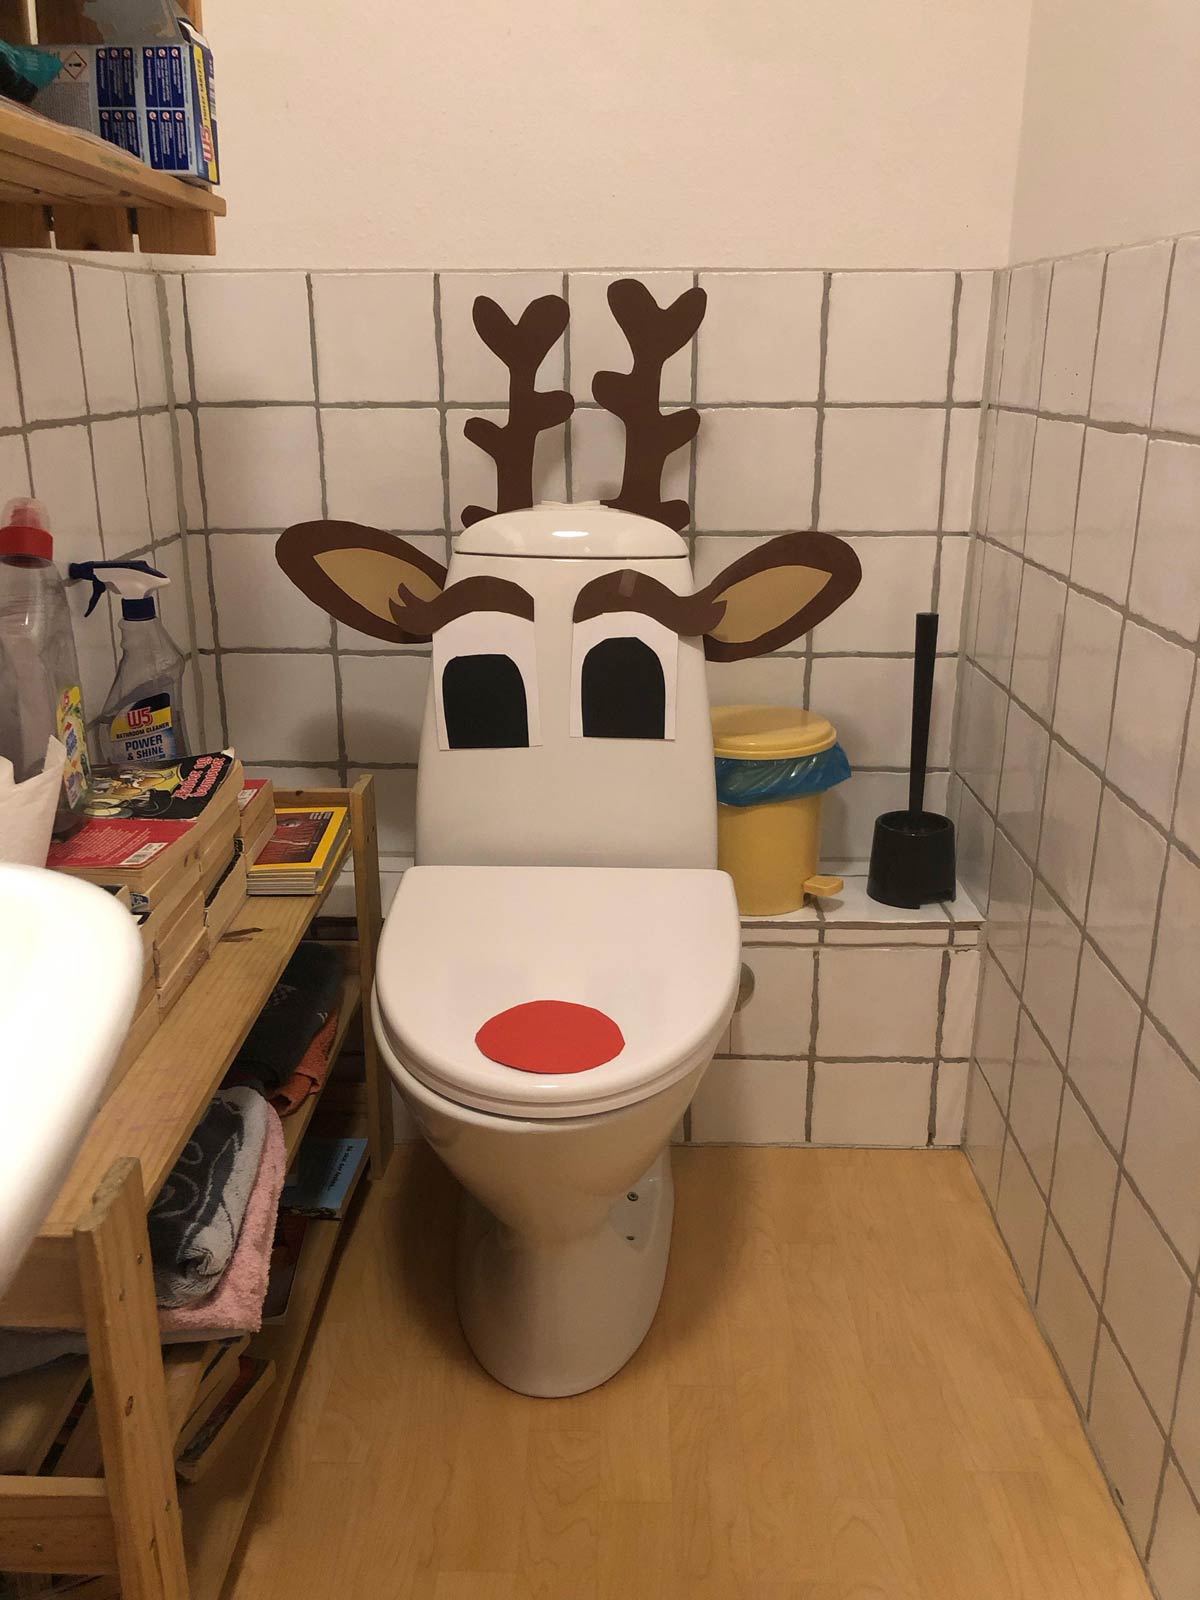 My dad made Pooh-dolph the red nosed drain-deer